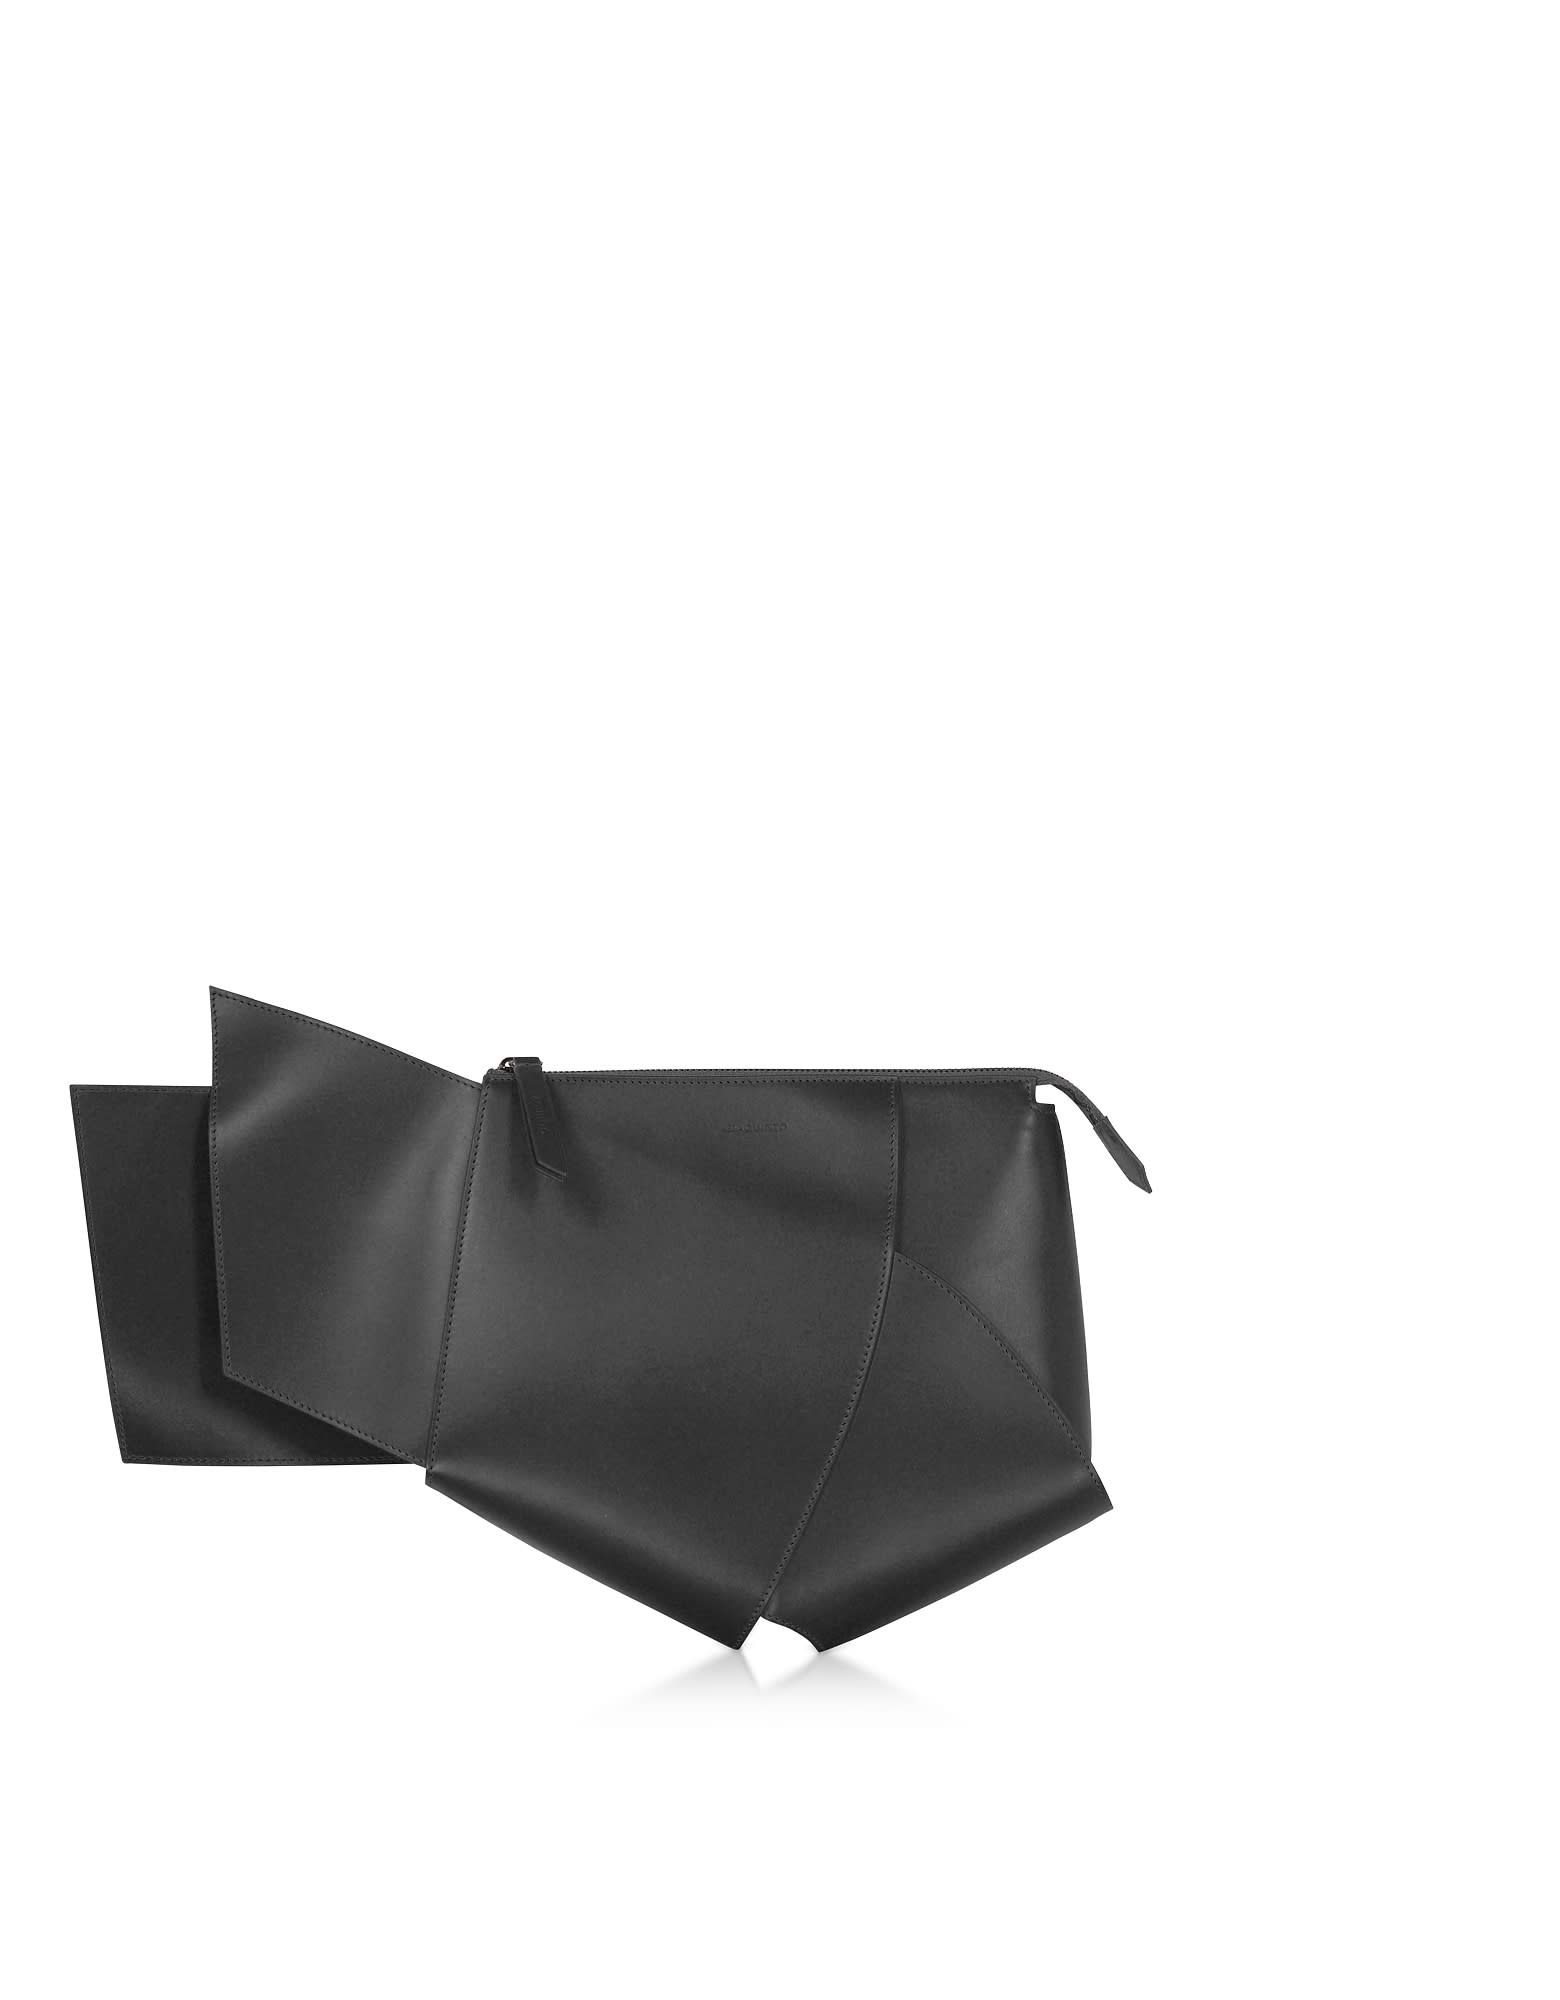 Giaquinto Ava Leather Clutch